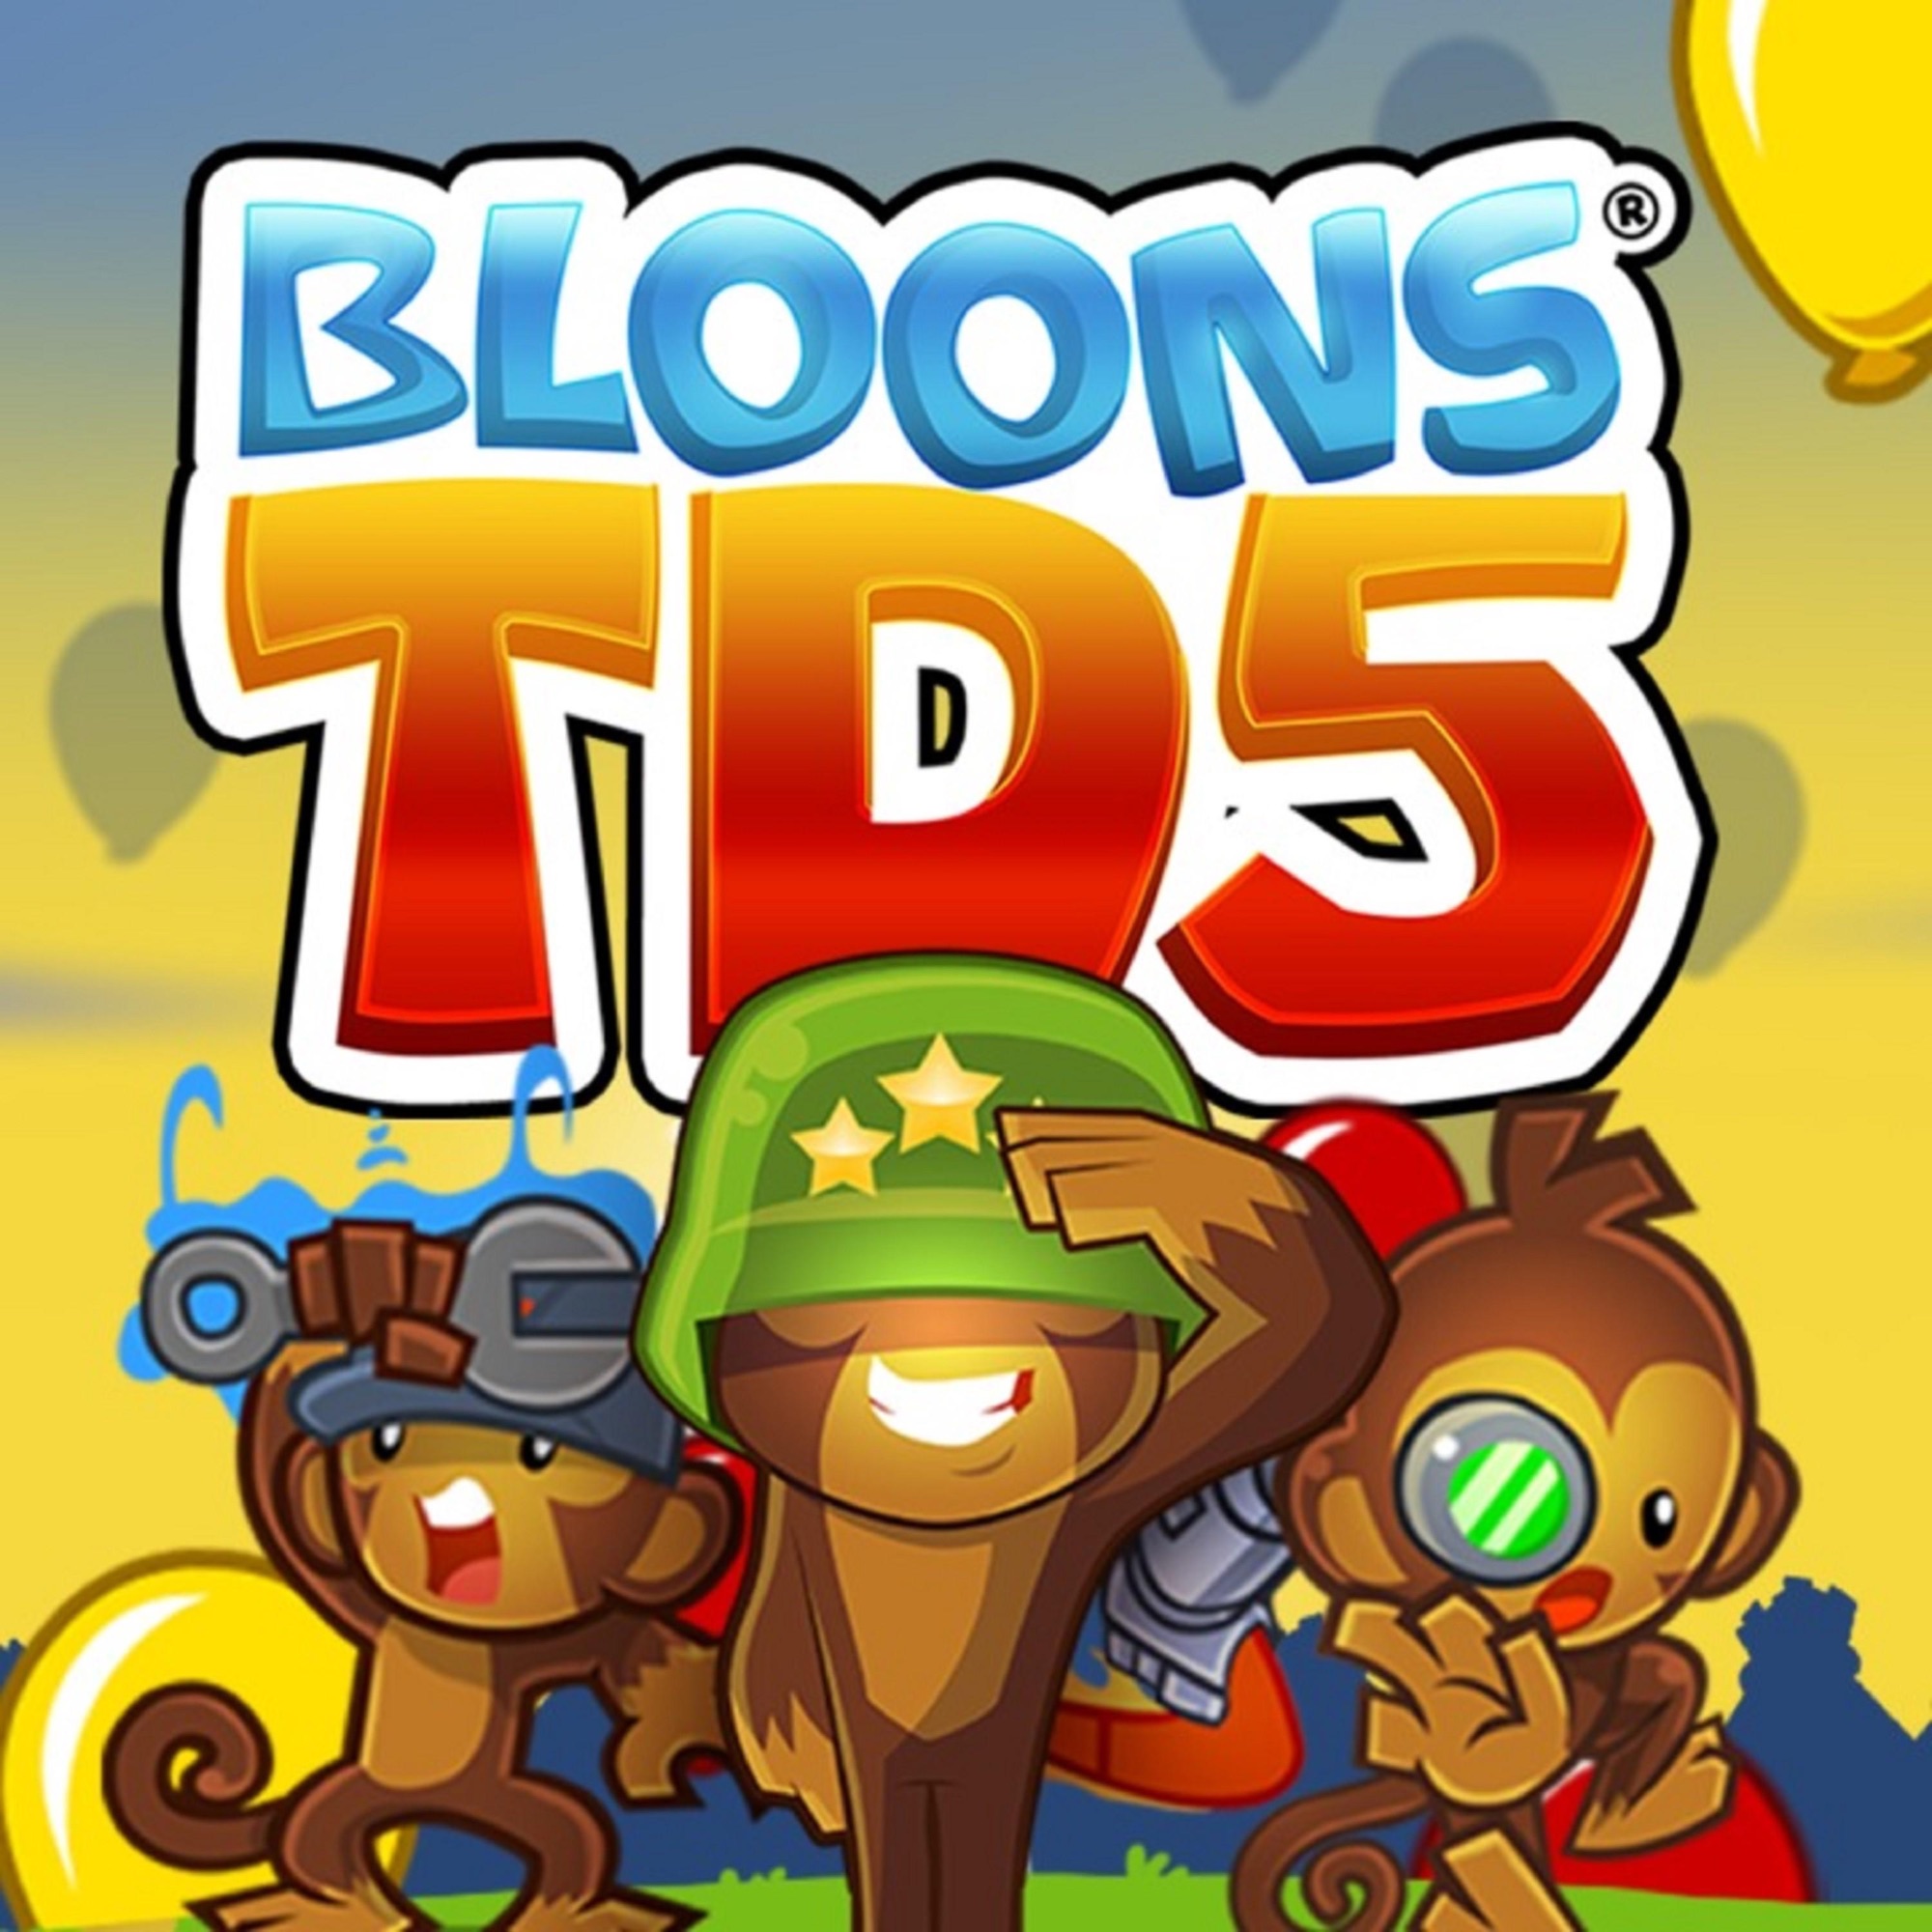 bloons tower defense 5 tyrone